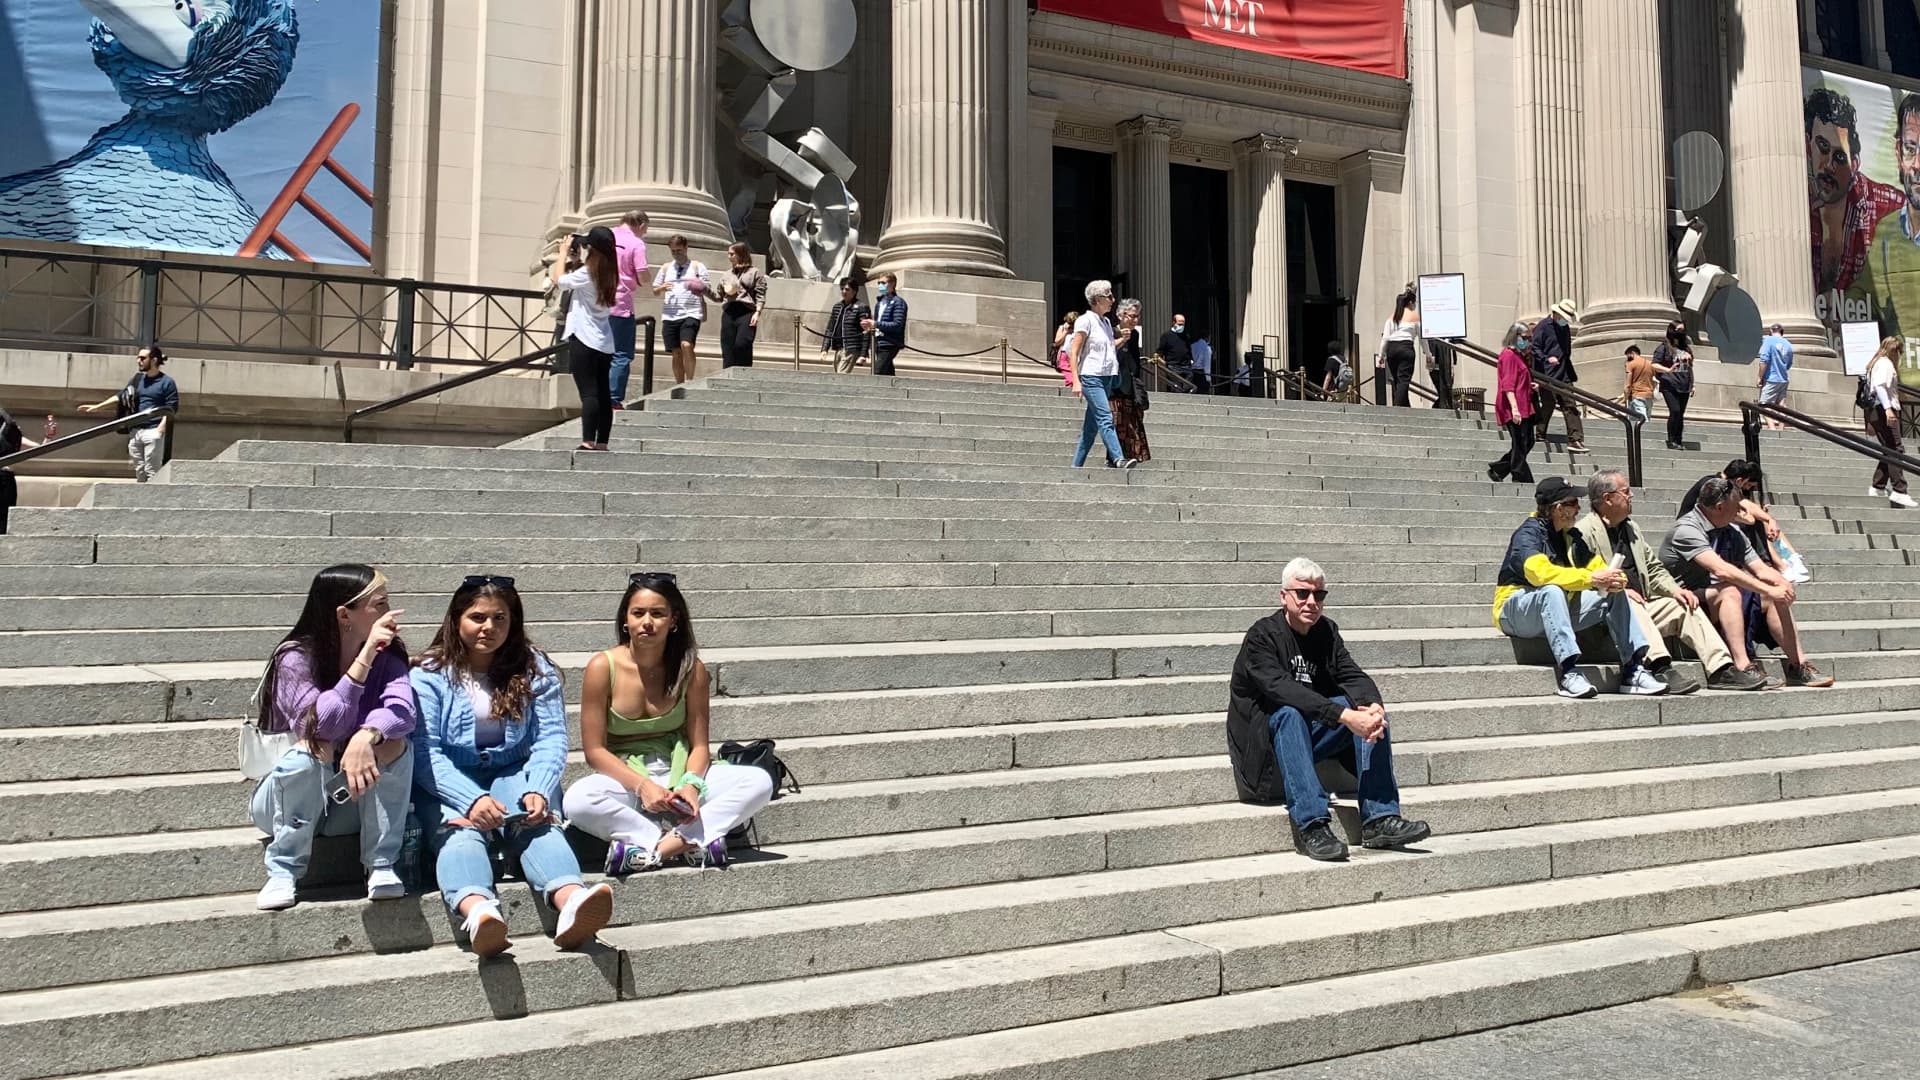 People enjoying the sunshine on the steps of The MET in New York City as the CDC lifts restrictions on mask wearing for those who are fully vaccinated.